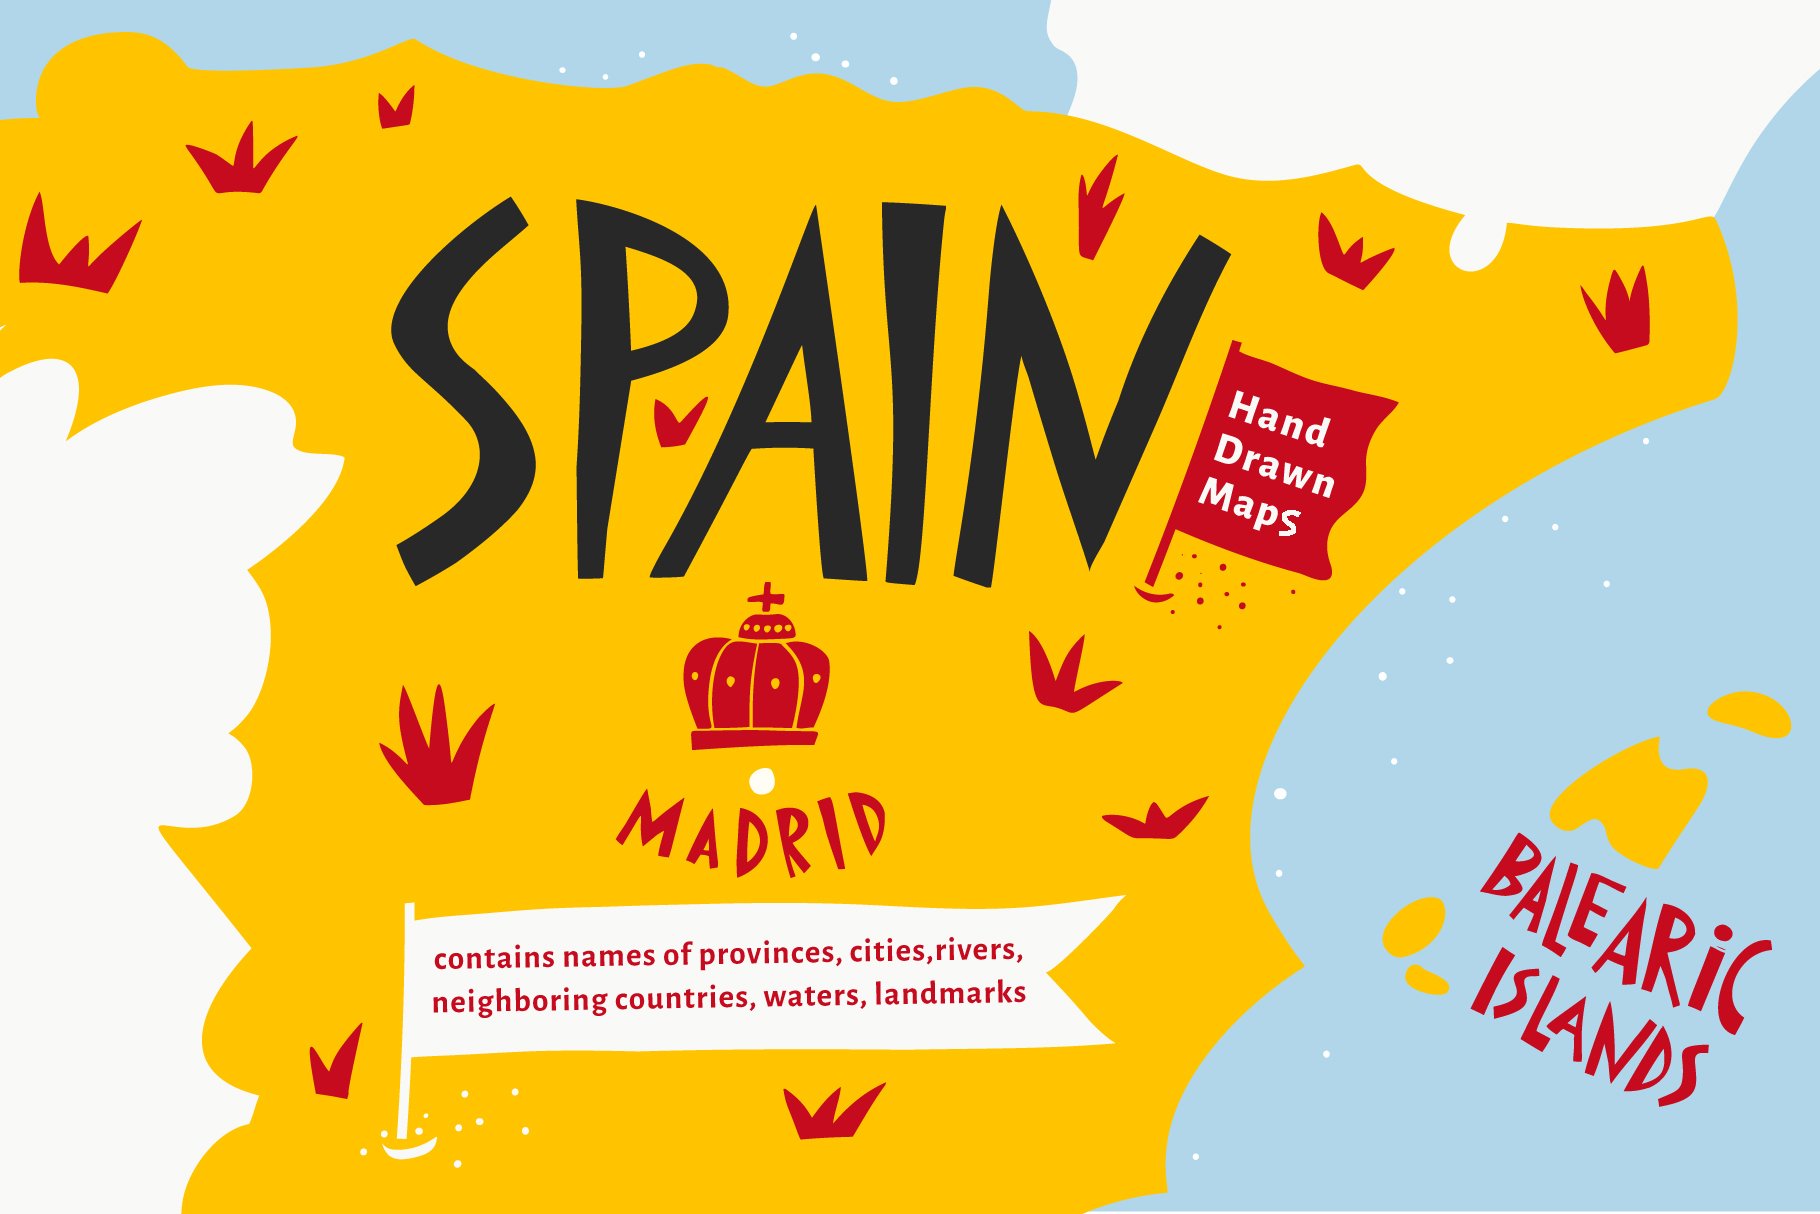 Spain. Hand Drawn Maps With Names cover image.